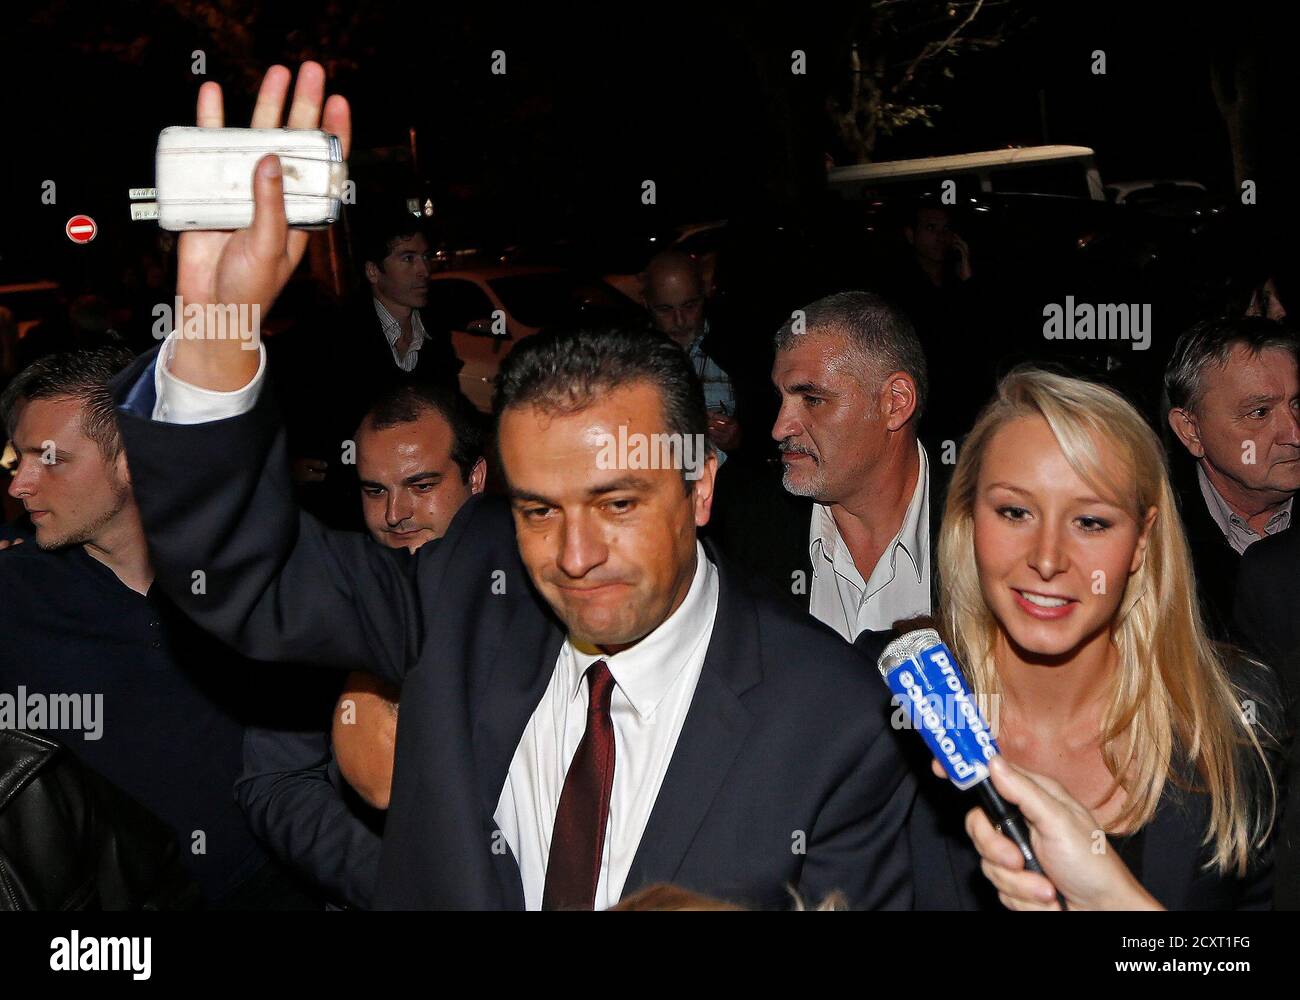 Front National Front party candidate, Laurent Lopez (L), waves to  supporters as he arrives with French National Front party deputy Marion  Marechal-Le Pen (R) after winning the second round of the local